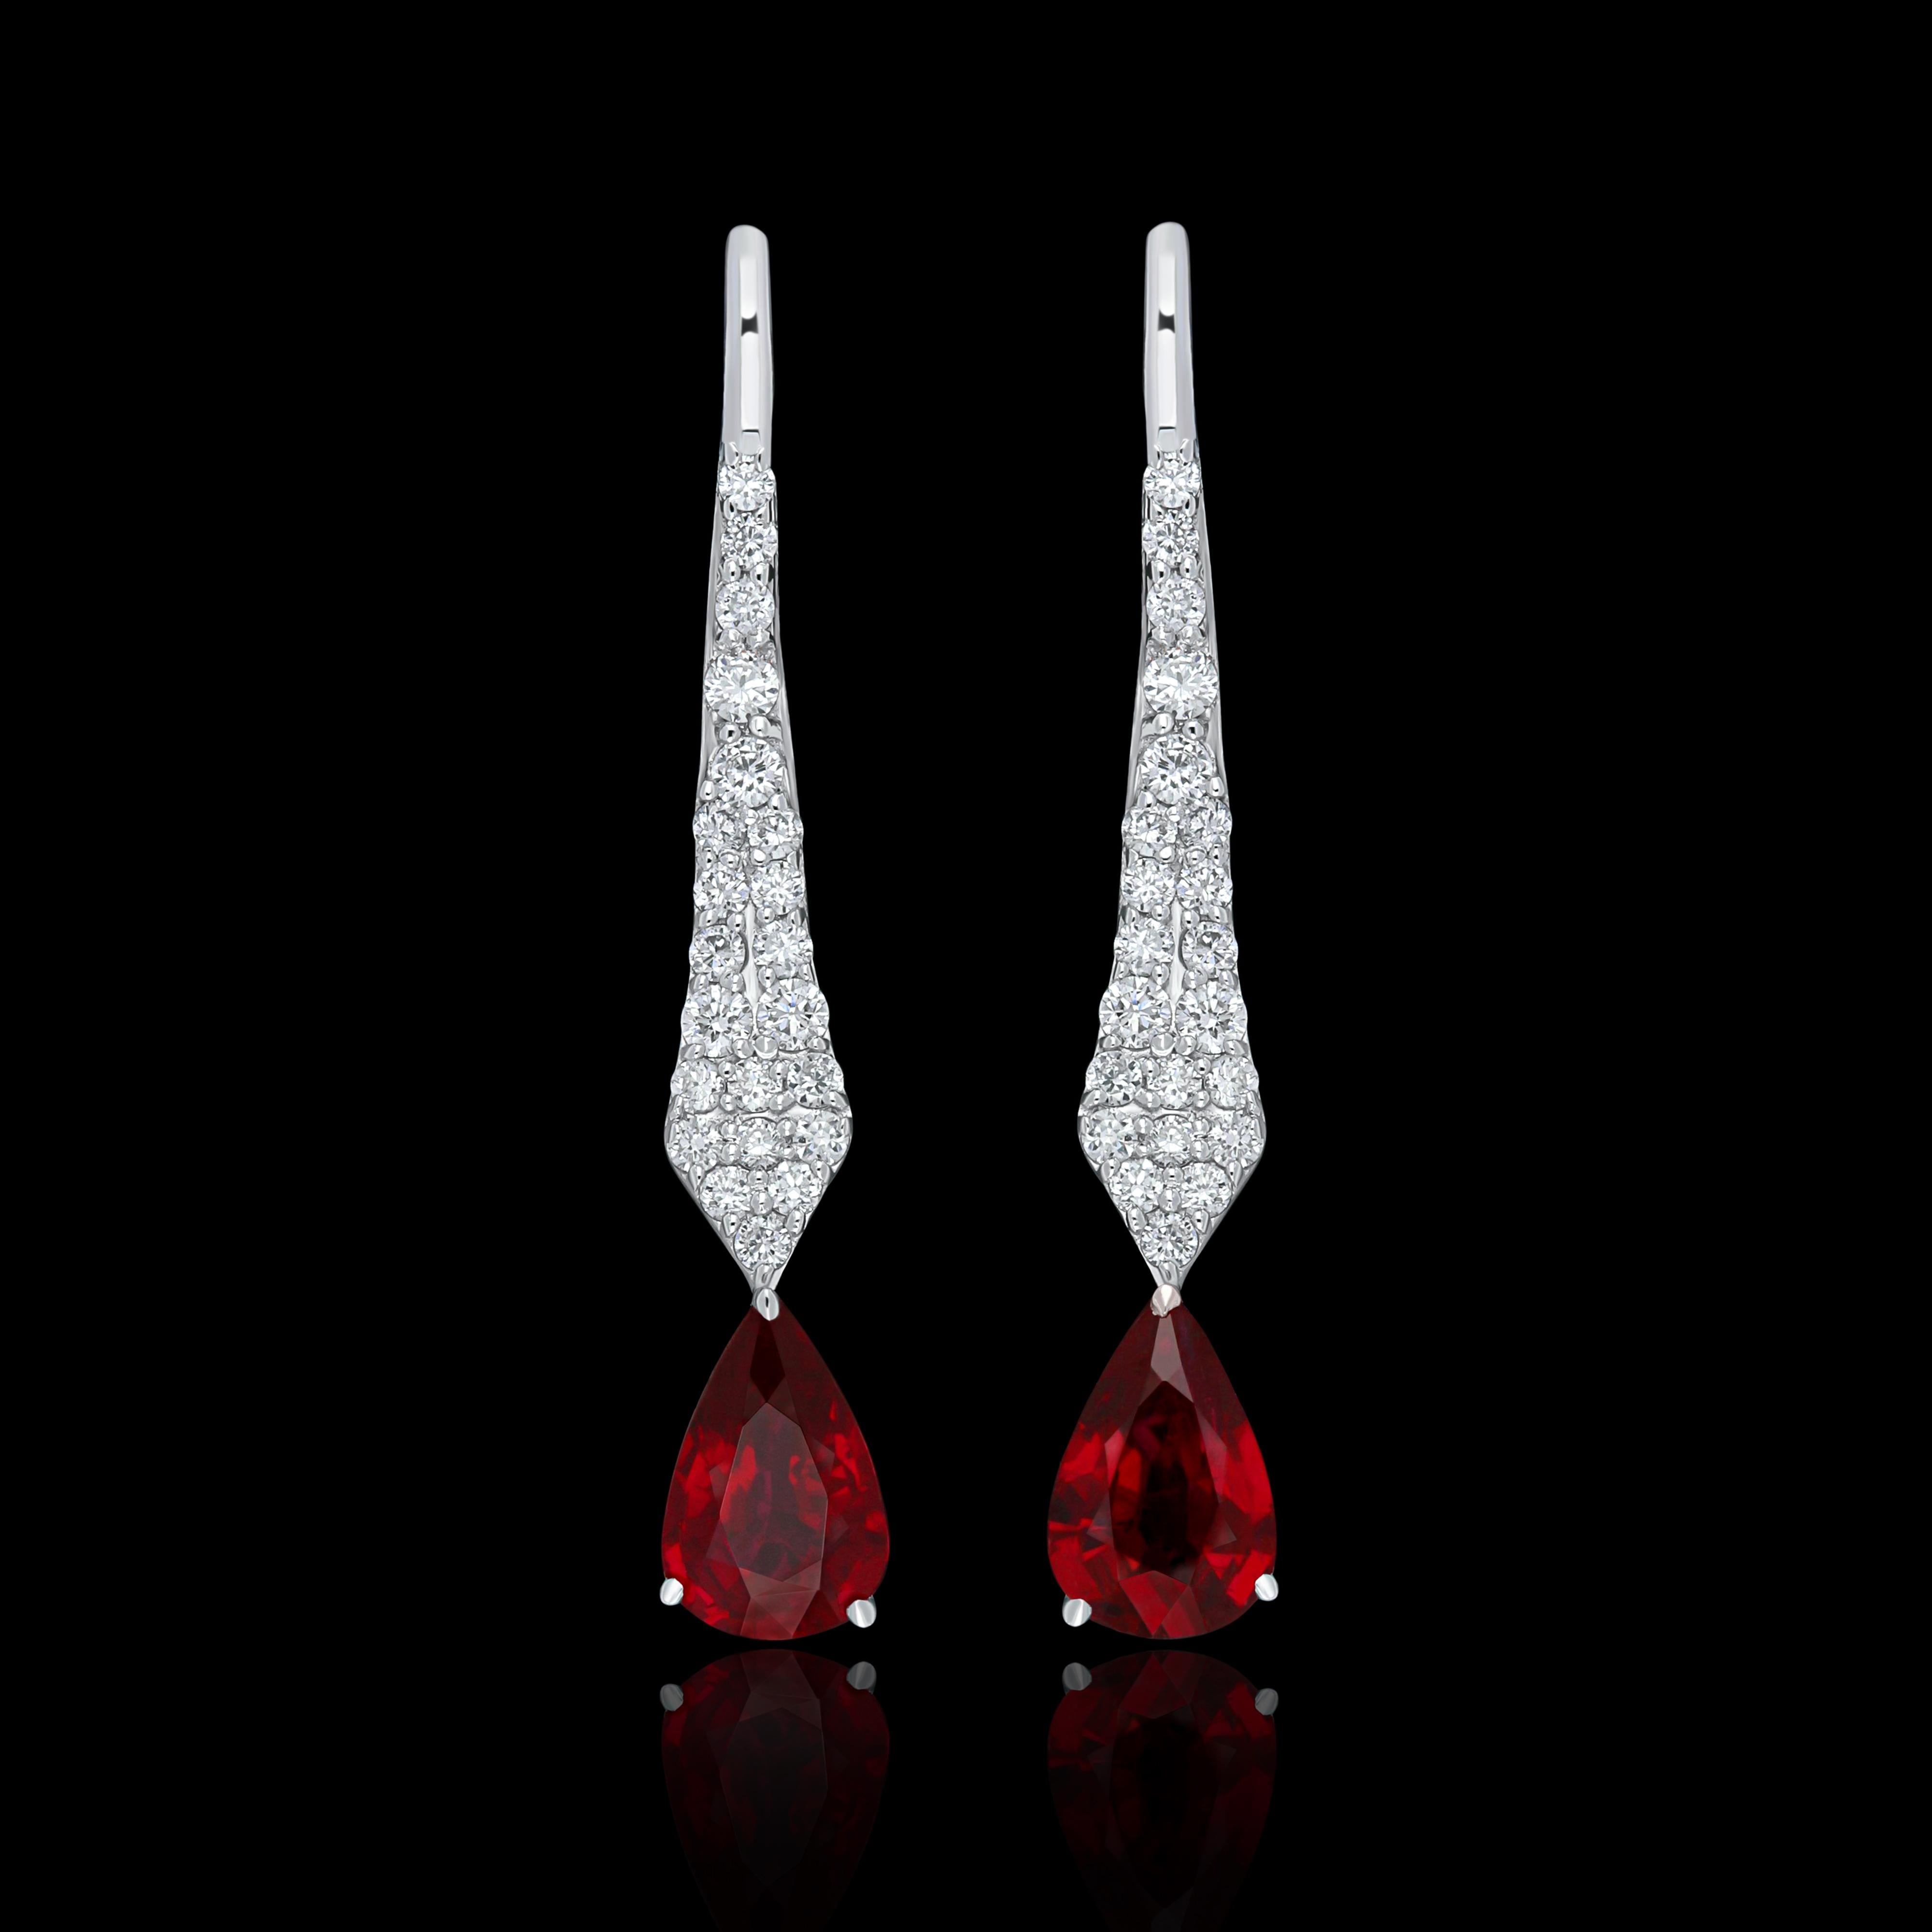 Elegant and exquisitely detailed 18 Karat White Gold Earrings, set with 0.77Cts .Pear Shape vibrant Red Mozambique Ruby and micro pave set Diamonds, weighing approx. 0.22Cts Beautifully Hand crafted in 18 Karat White Gold.

Stone Detail:
Ruby